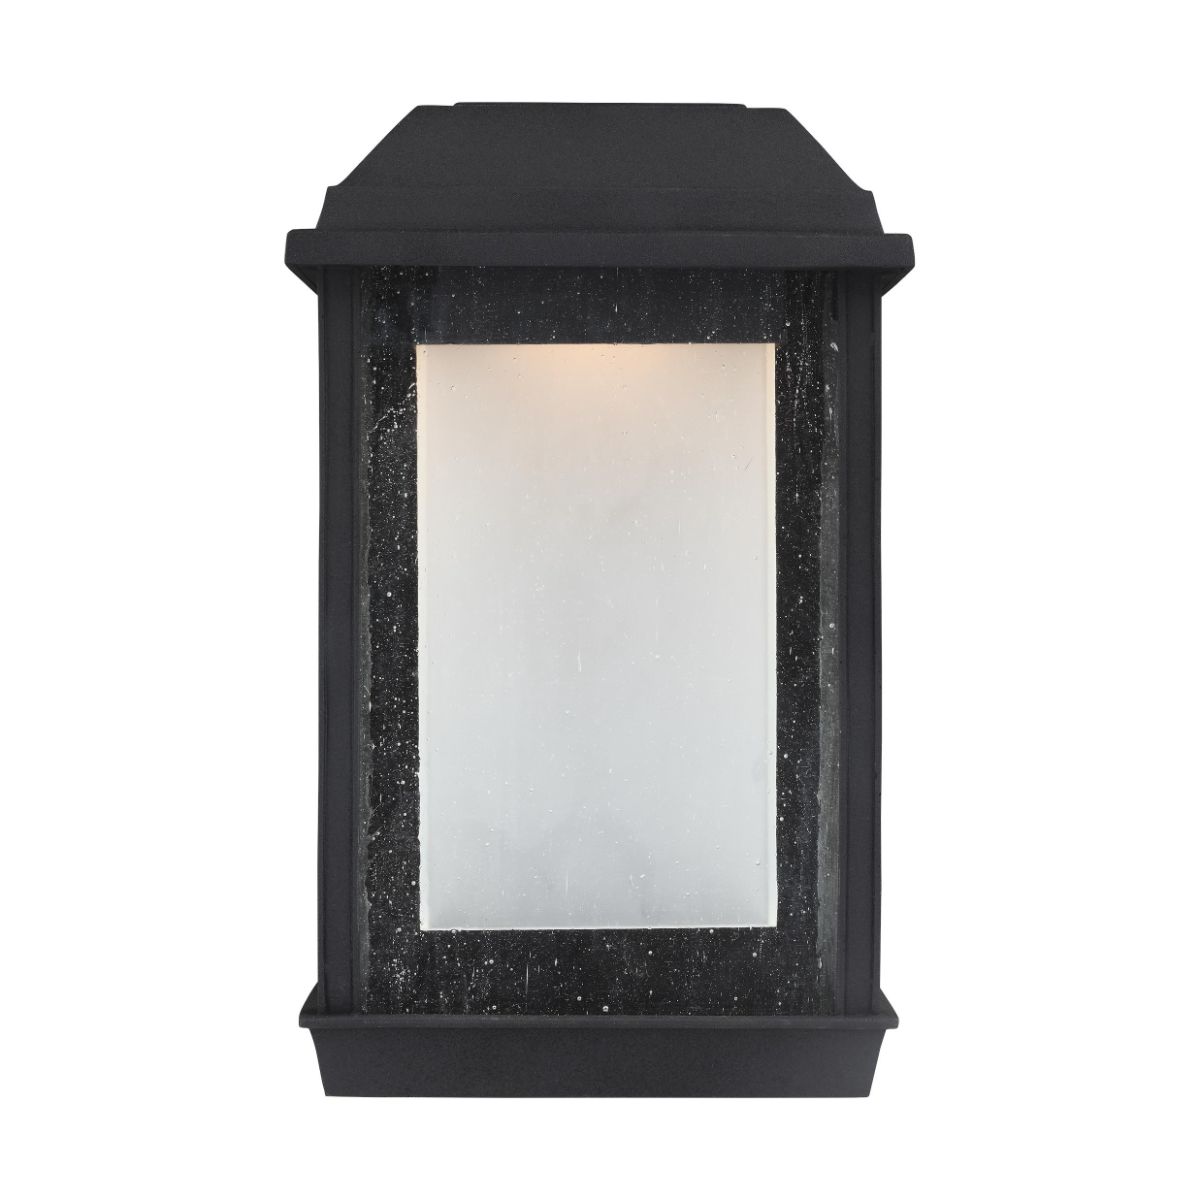 McHenry 13 In. LED Outdoor Wall Sconce Black Finish